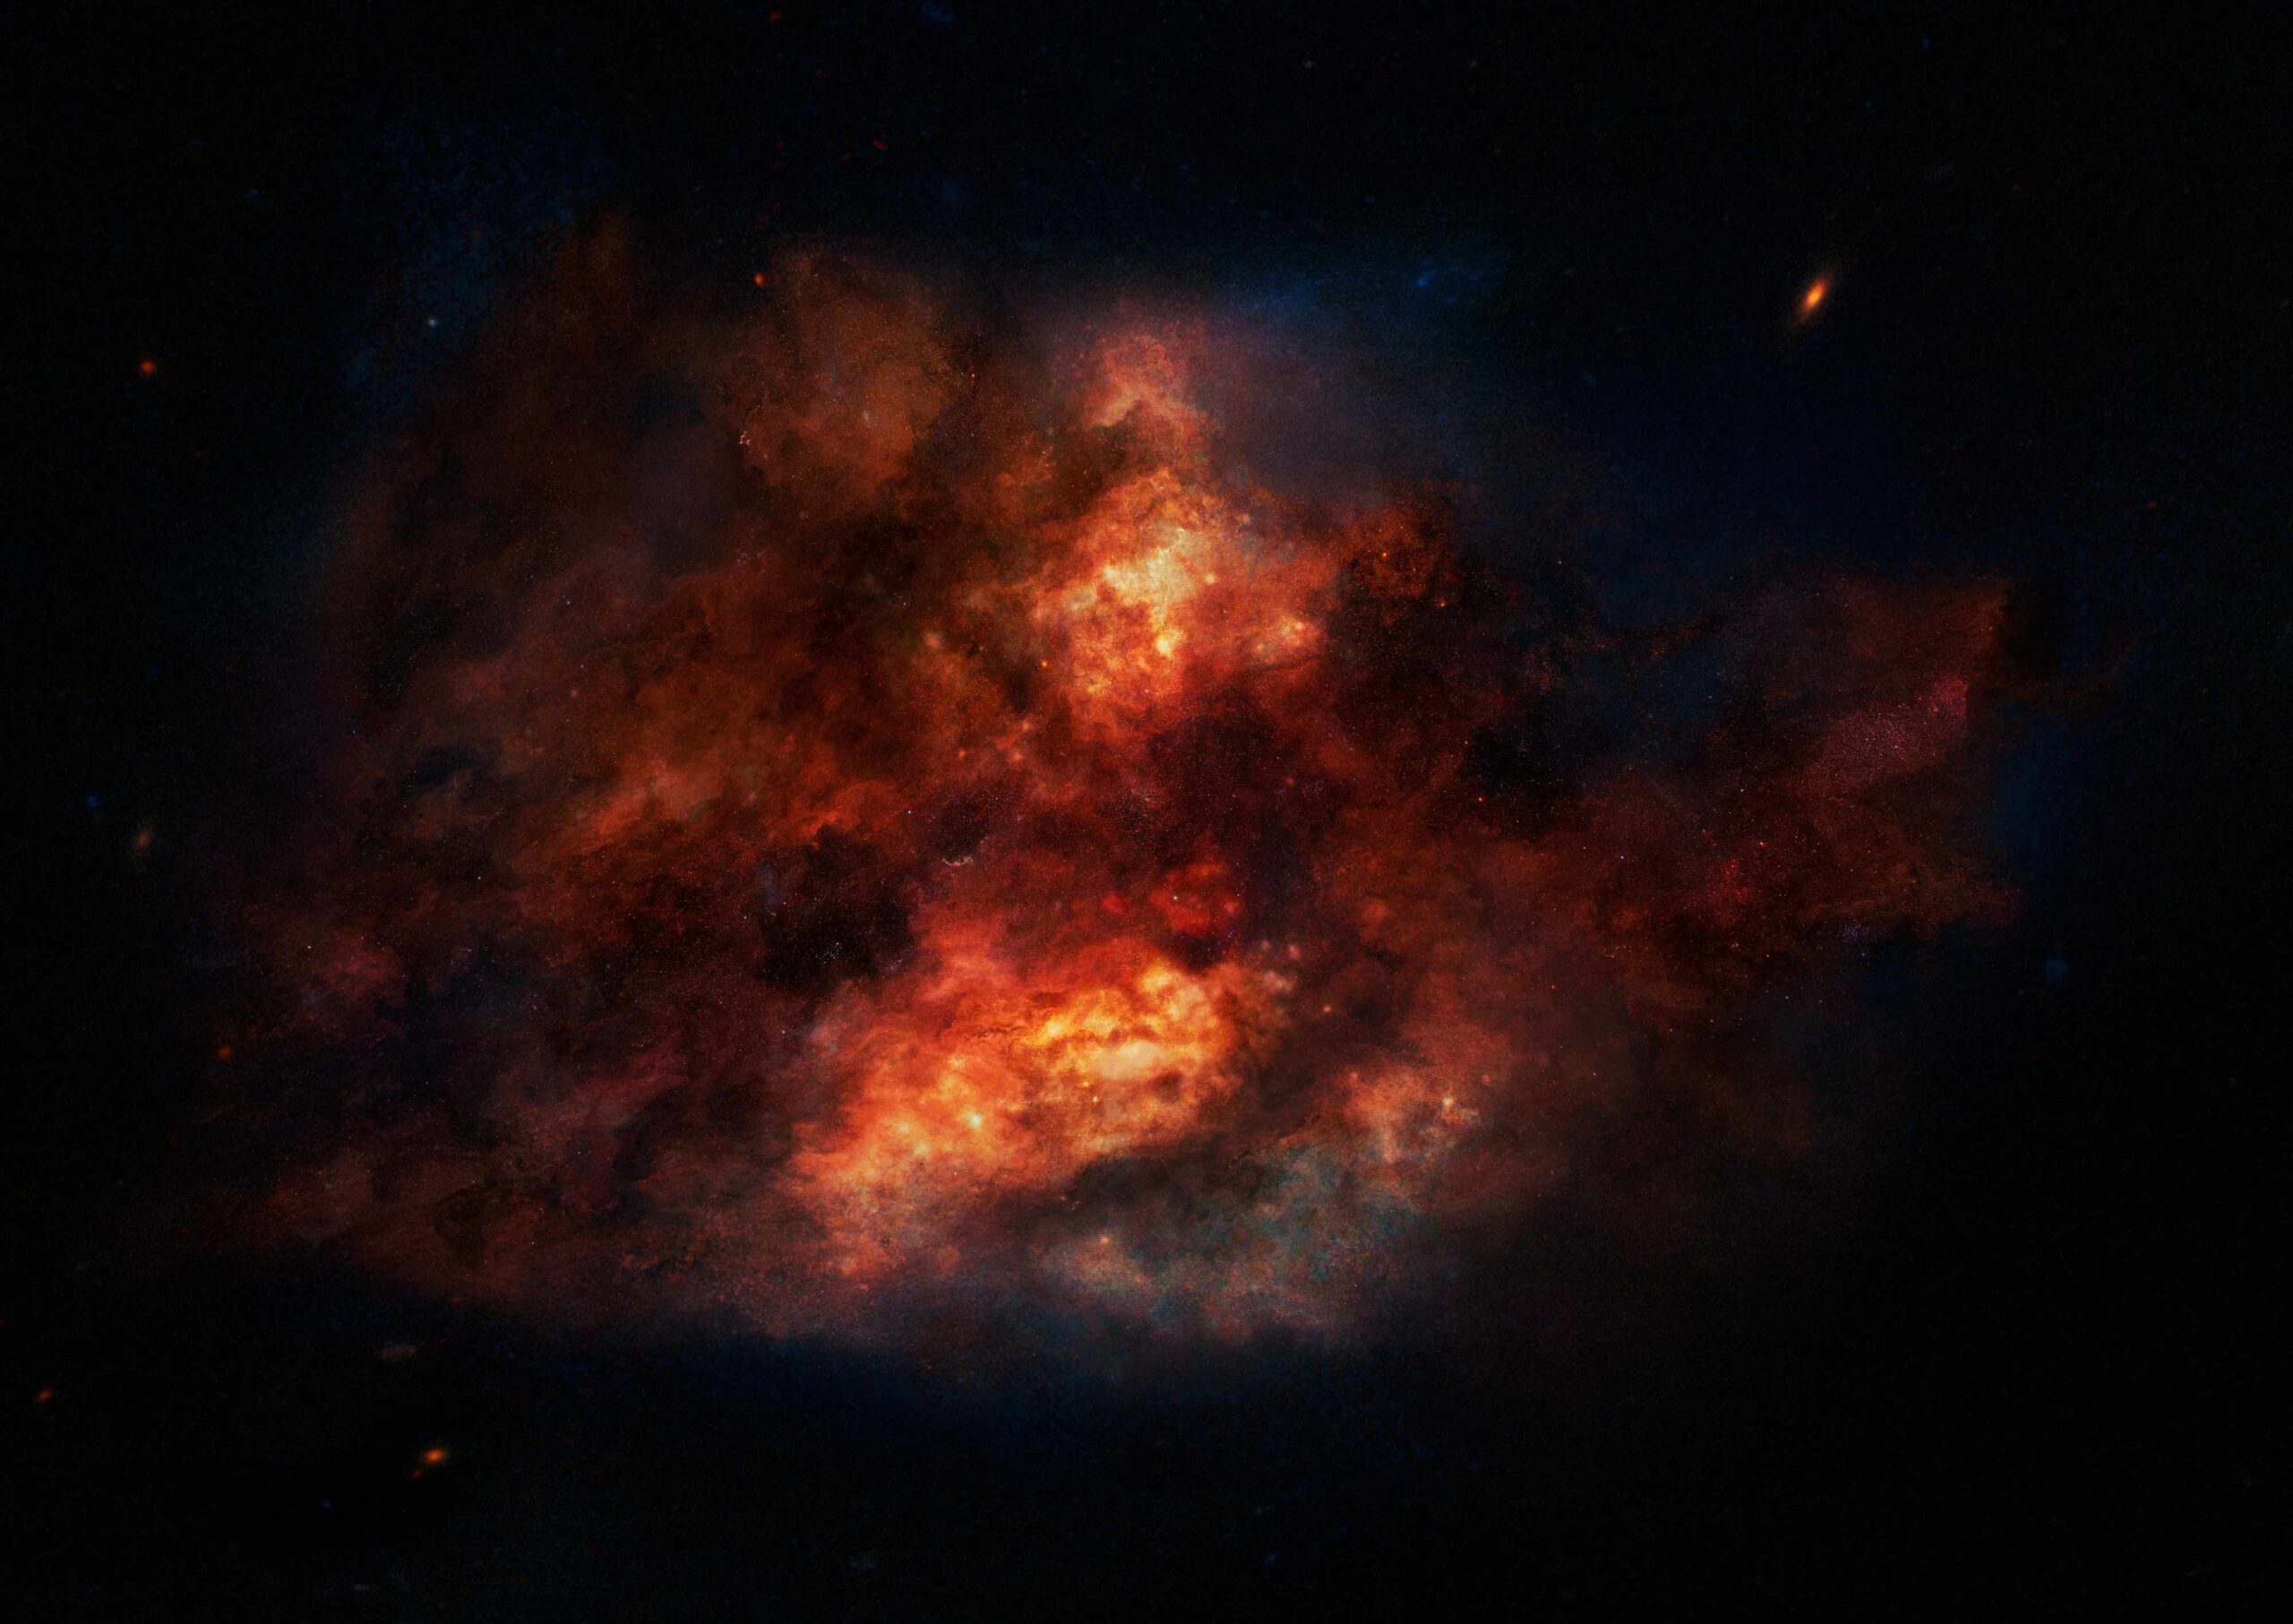 Galaxies in the distant Universe are seen during their youth and therefore have relatively short and uneventful star formation histories. This makes them an ideal laboratory to study the earliest epochs of star formation. But at a price — they are often enshrouded by obscuring dust that hampers the correct interpretation of the observations.